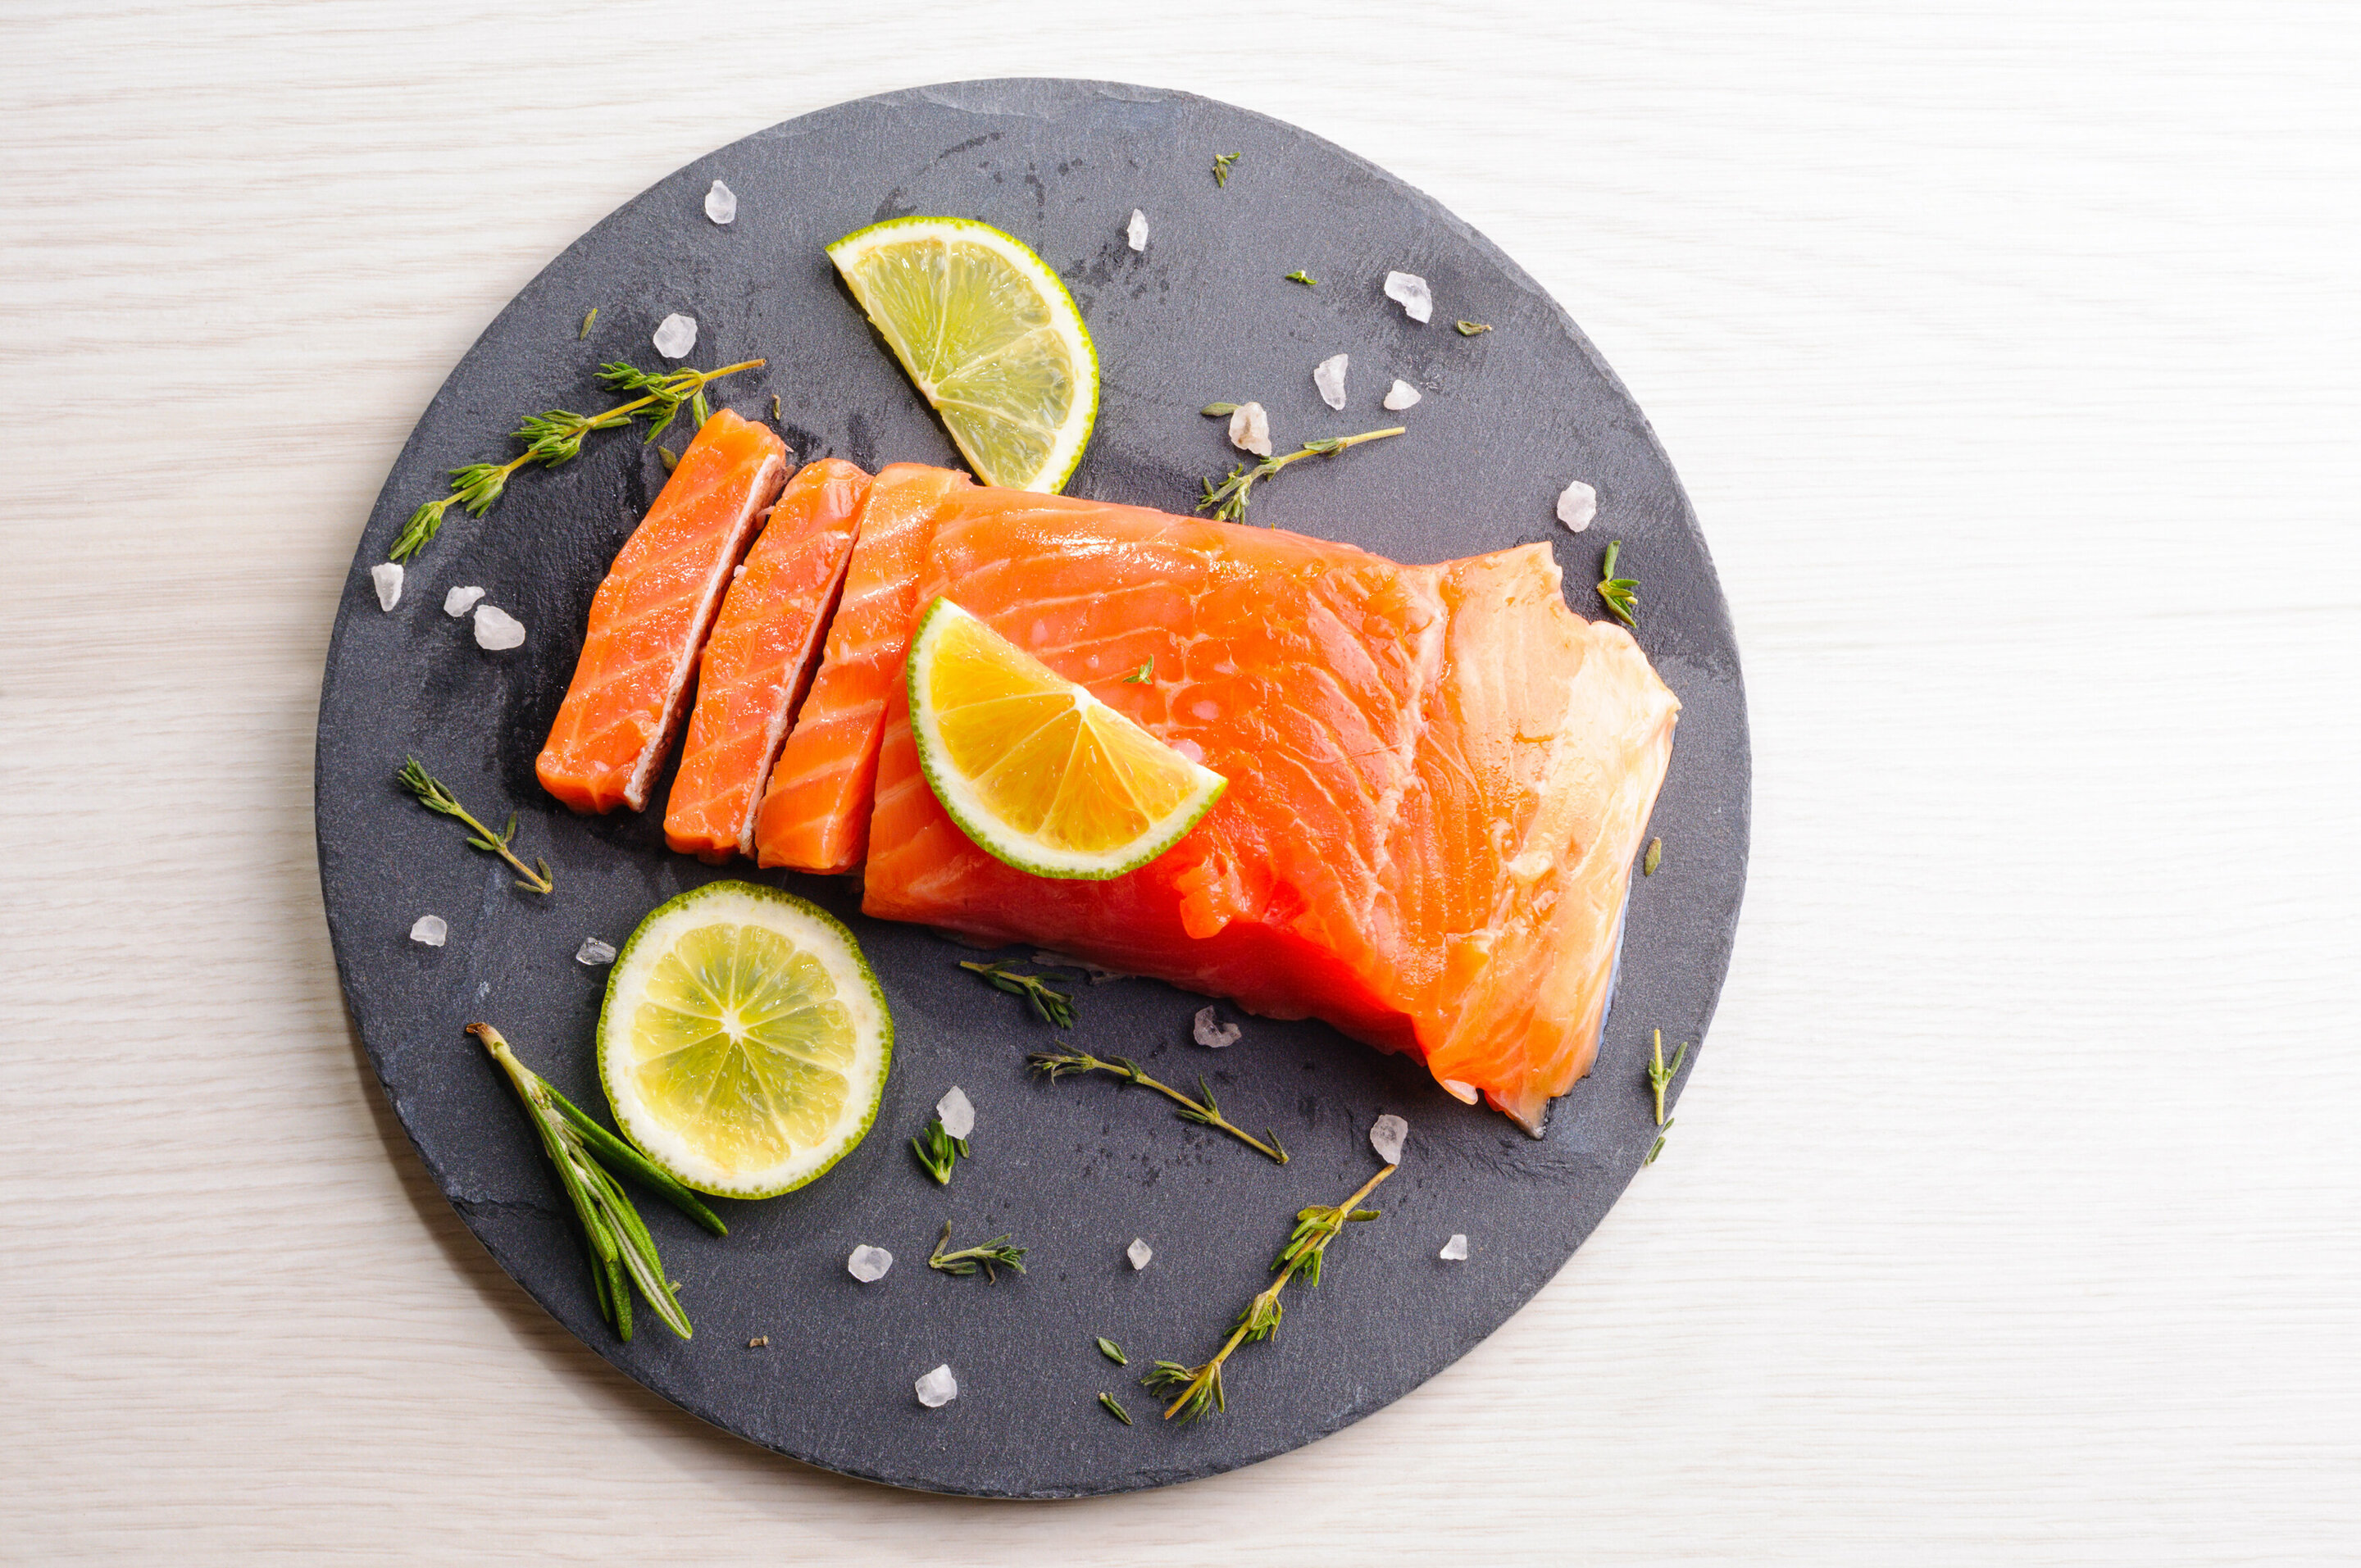 Fatty fish without environmental pollutants protect against type 2 diabetes